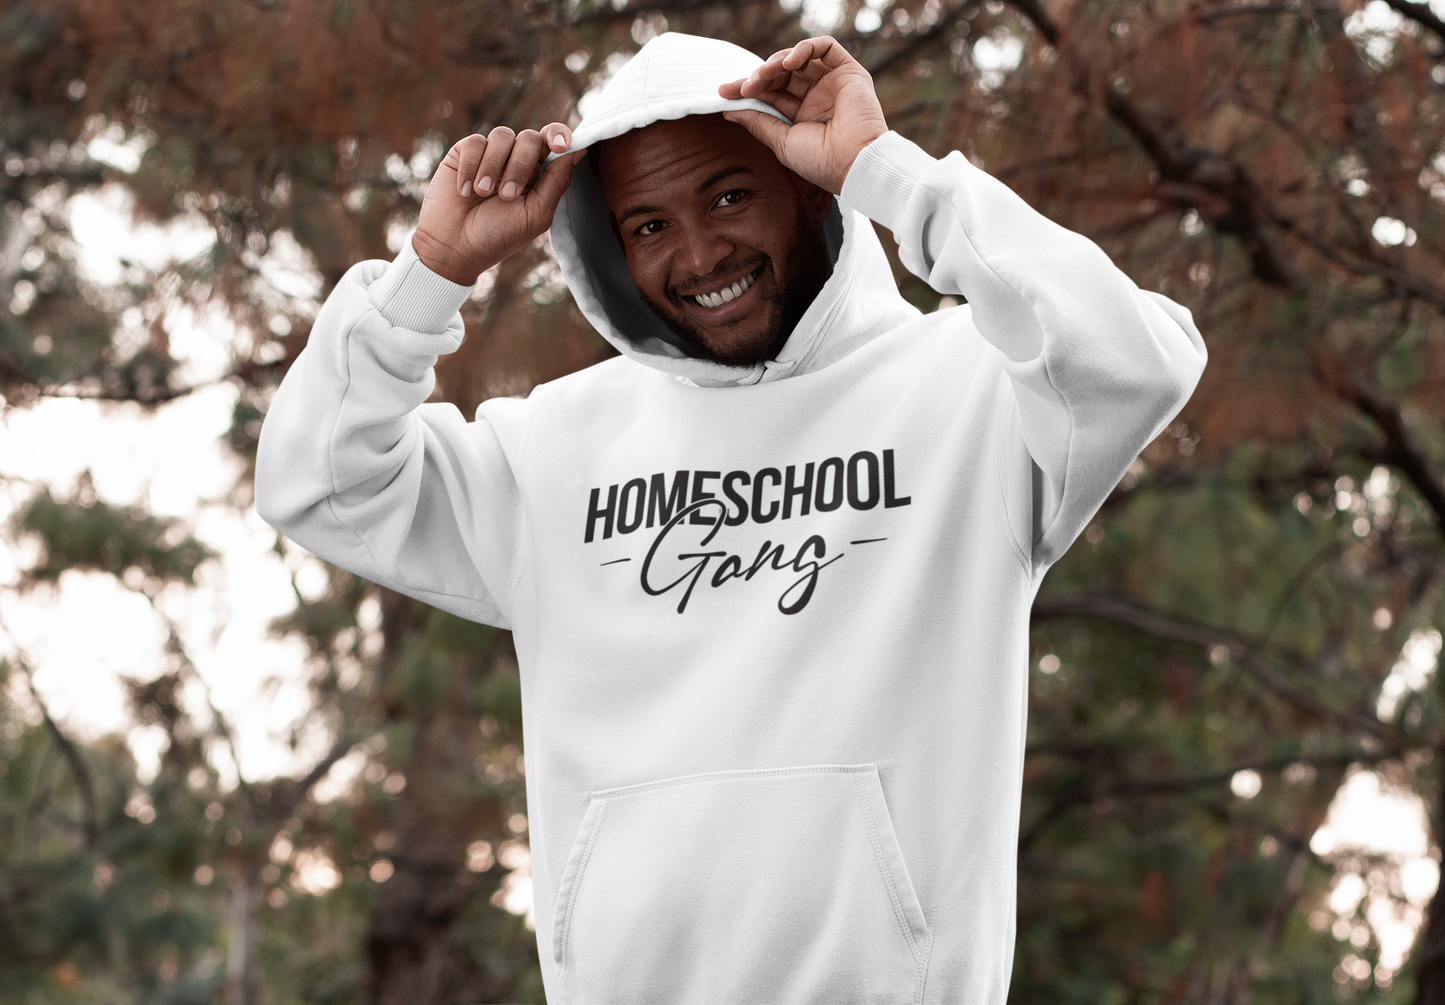 Person wearing the Homeschool Gang Hoodie with logo visible, symbolizing homeschool pride and community spirit.